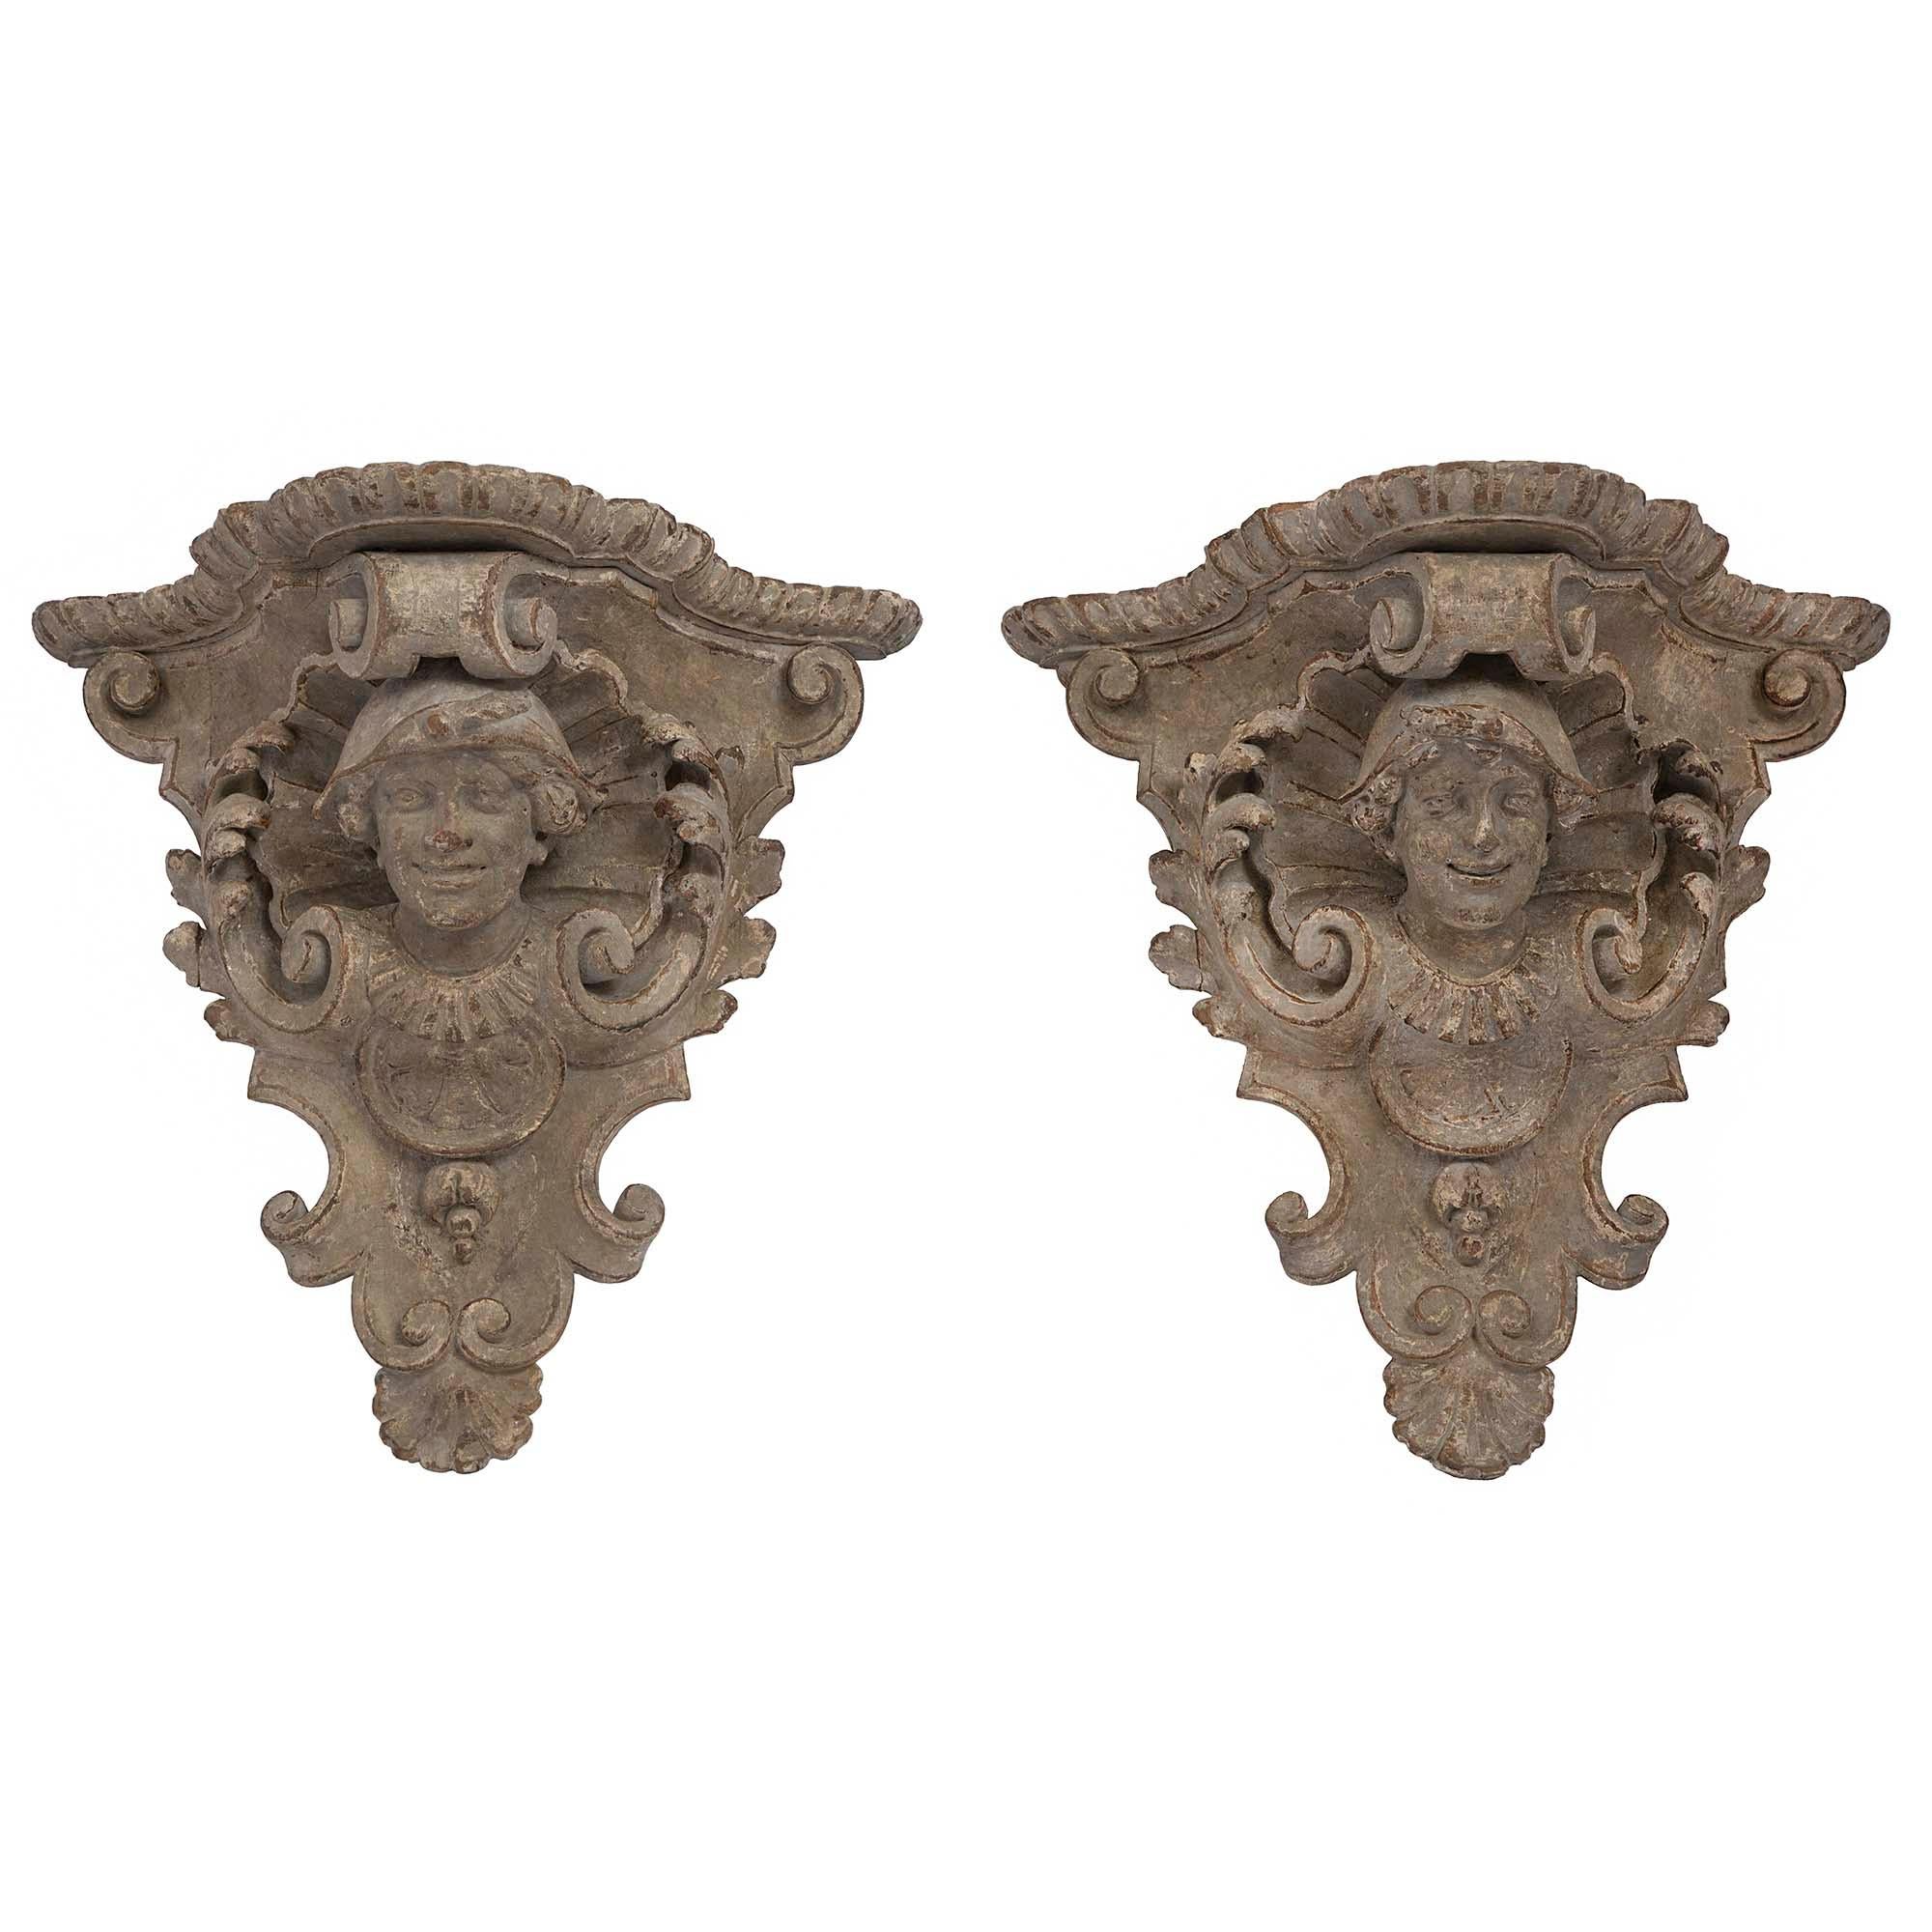 Pair of Italian Early 19th Century Carved and Patinated Venetian Wall Brackets In Good Condition For Sale In West Palm Beach, FL